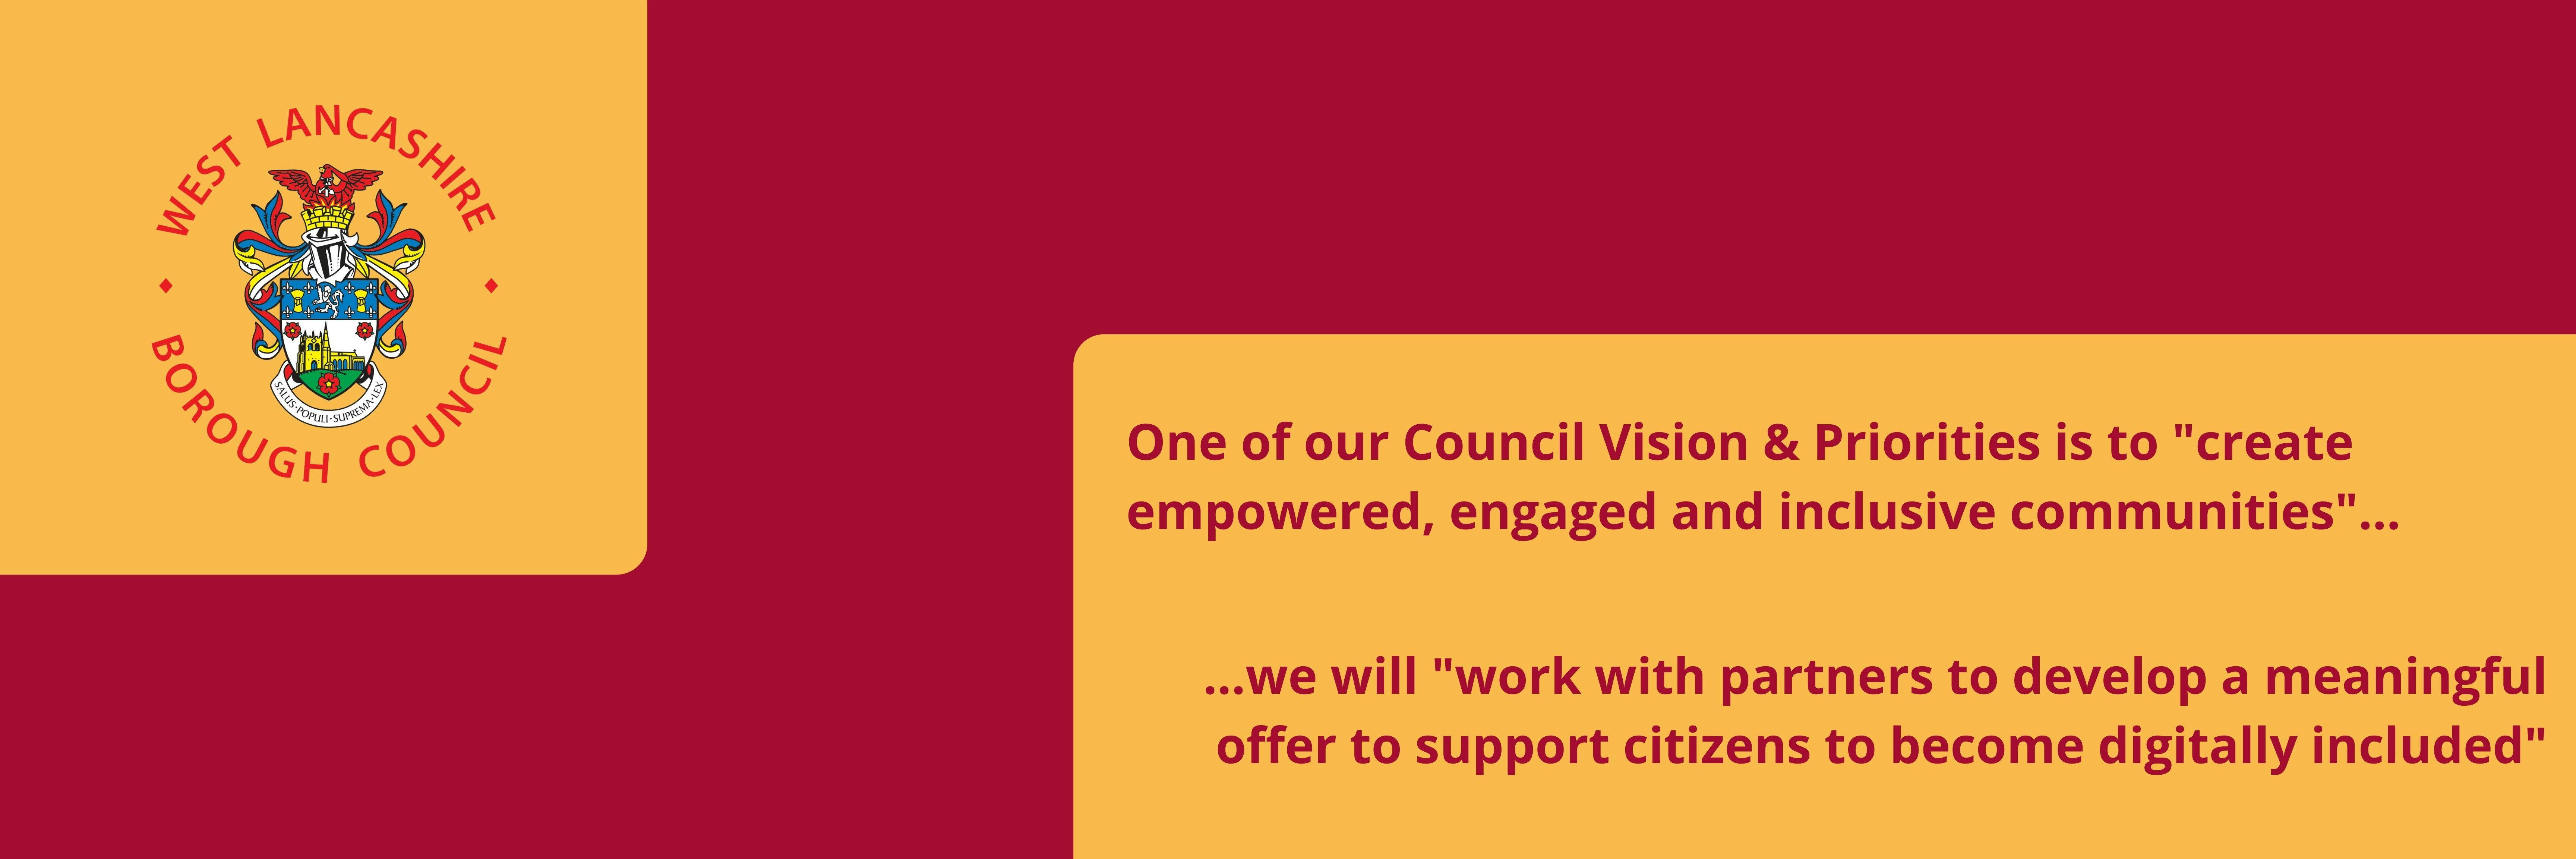 One of our Council Vision & Priorities is to "create empowered, engaged and inclusive communities"